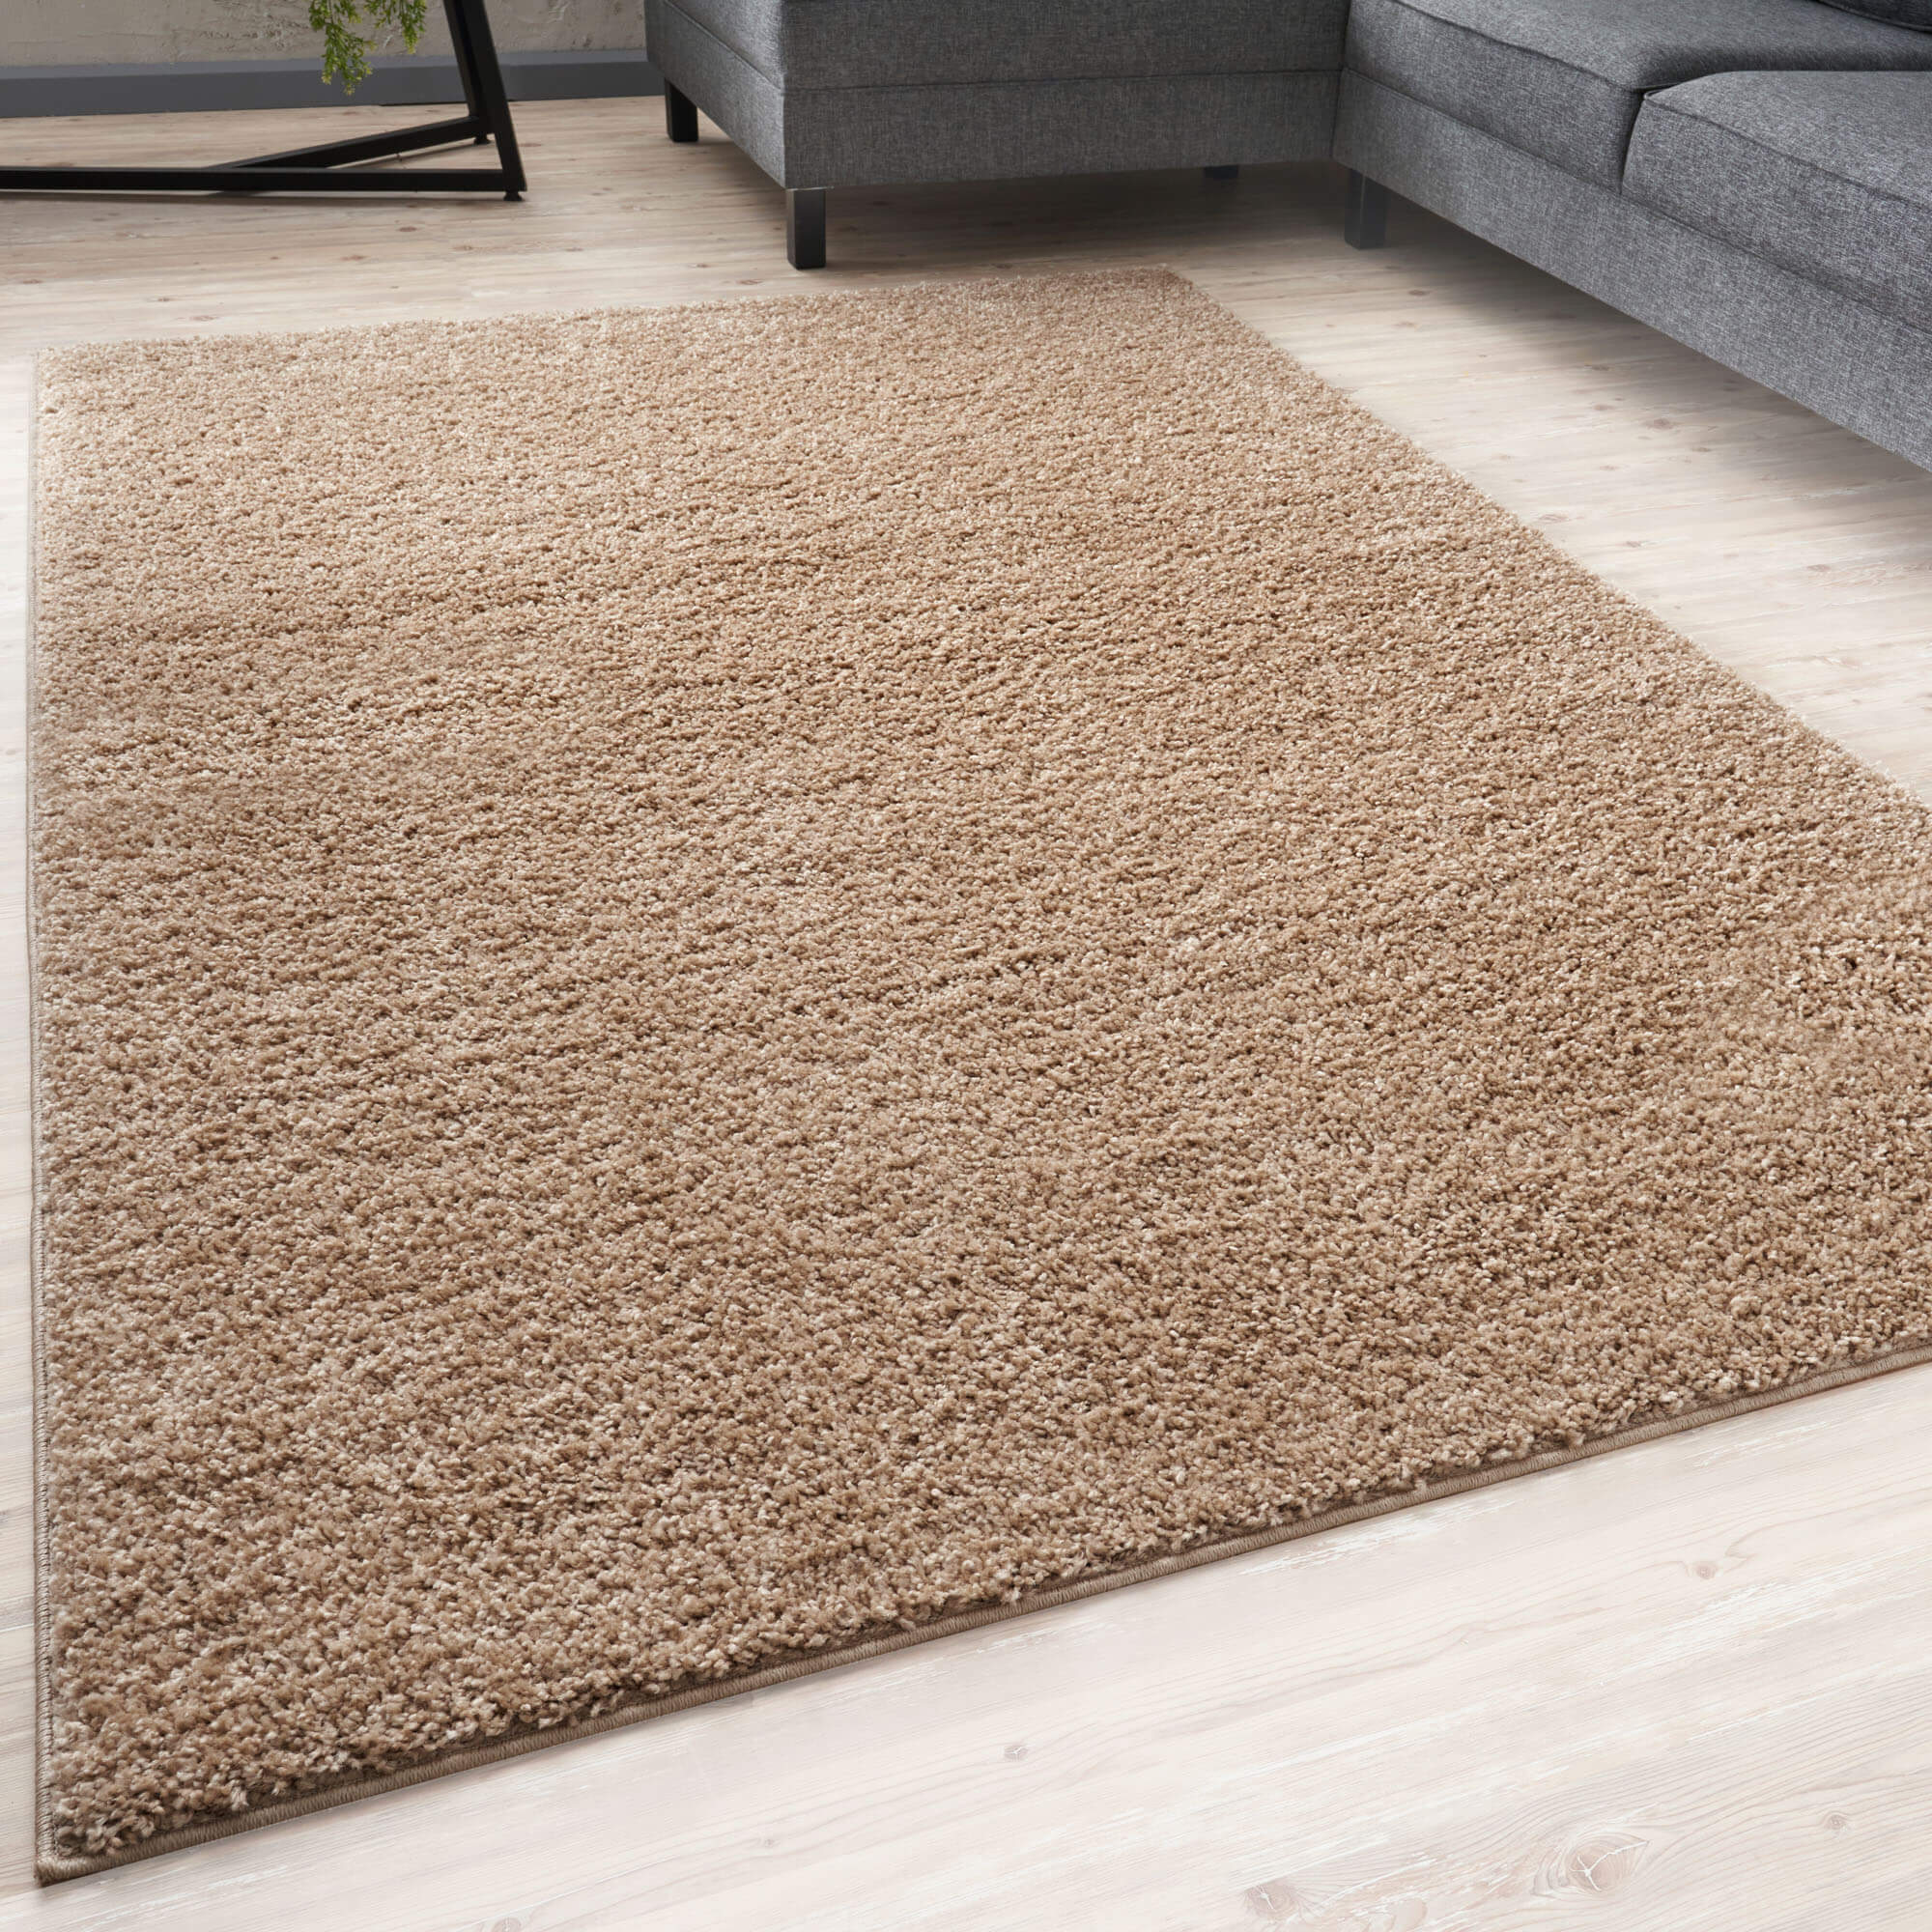 Shaggy Rugs: Fluffy, Thick & High Pile Rug | The Rugs